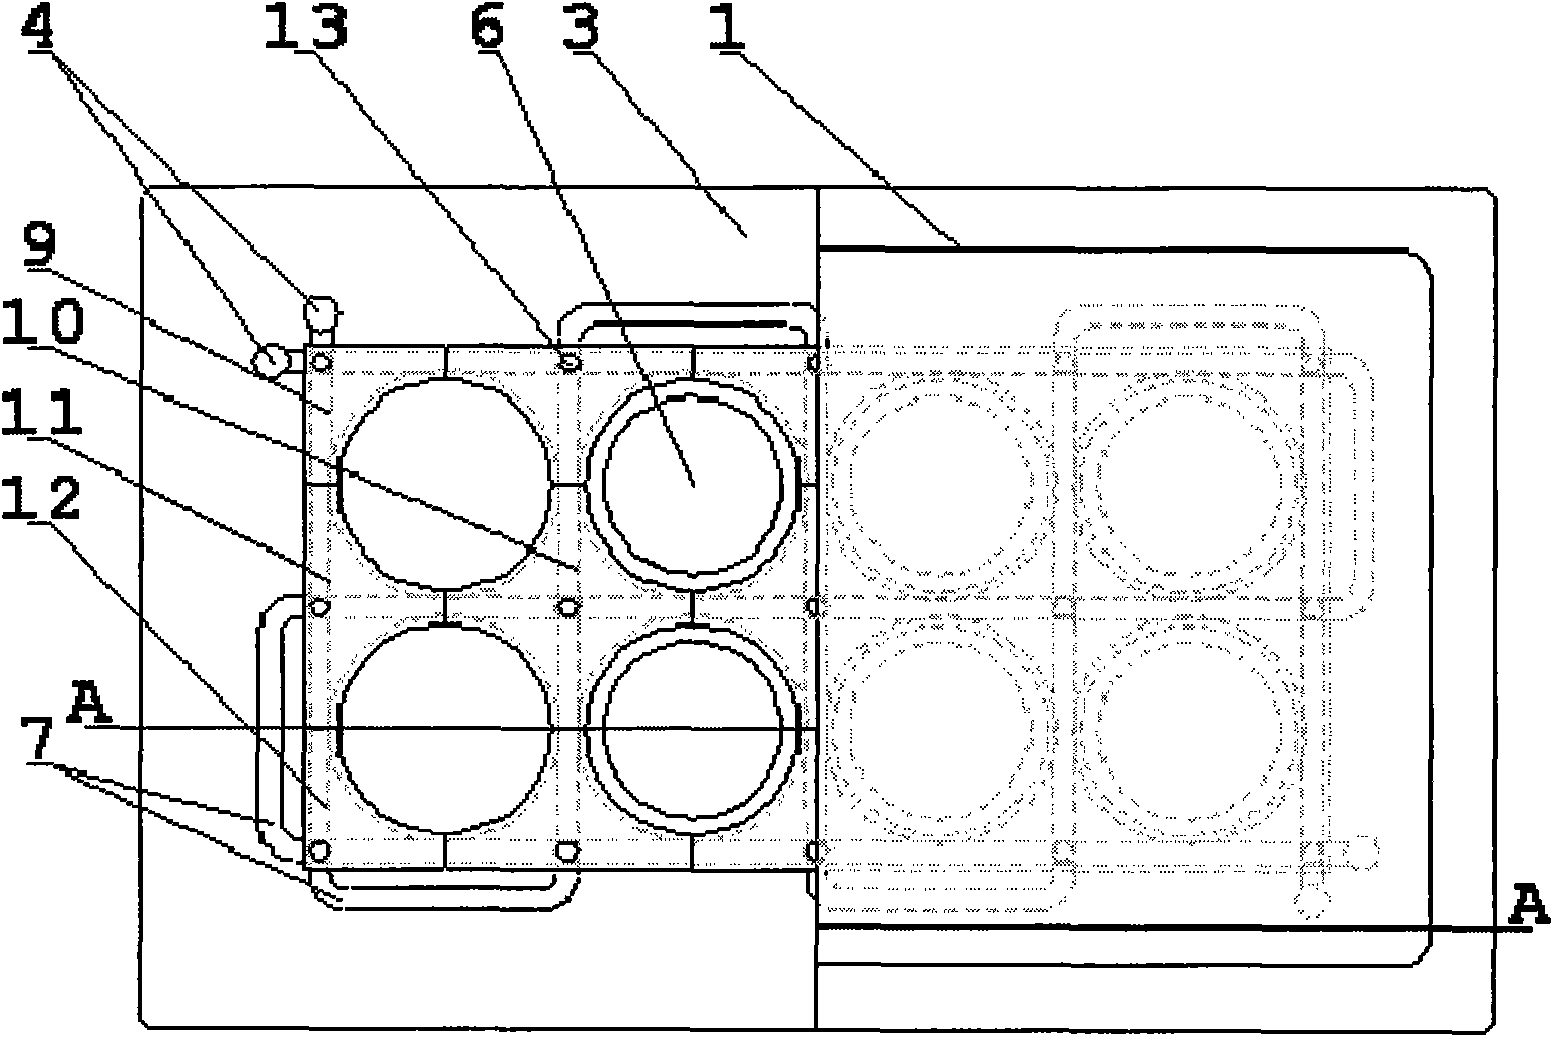 Array solid hydrogen storage and discharge device